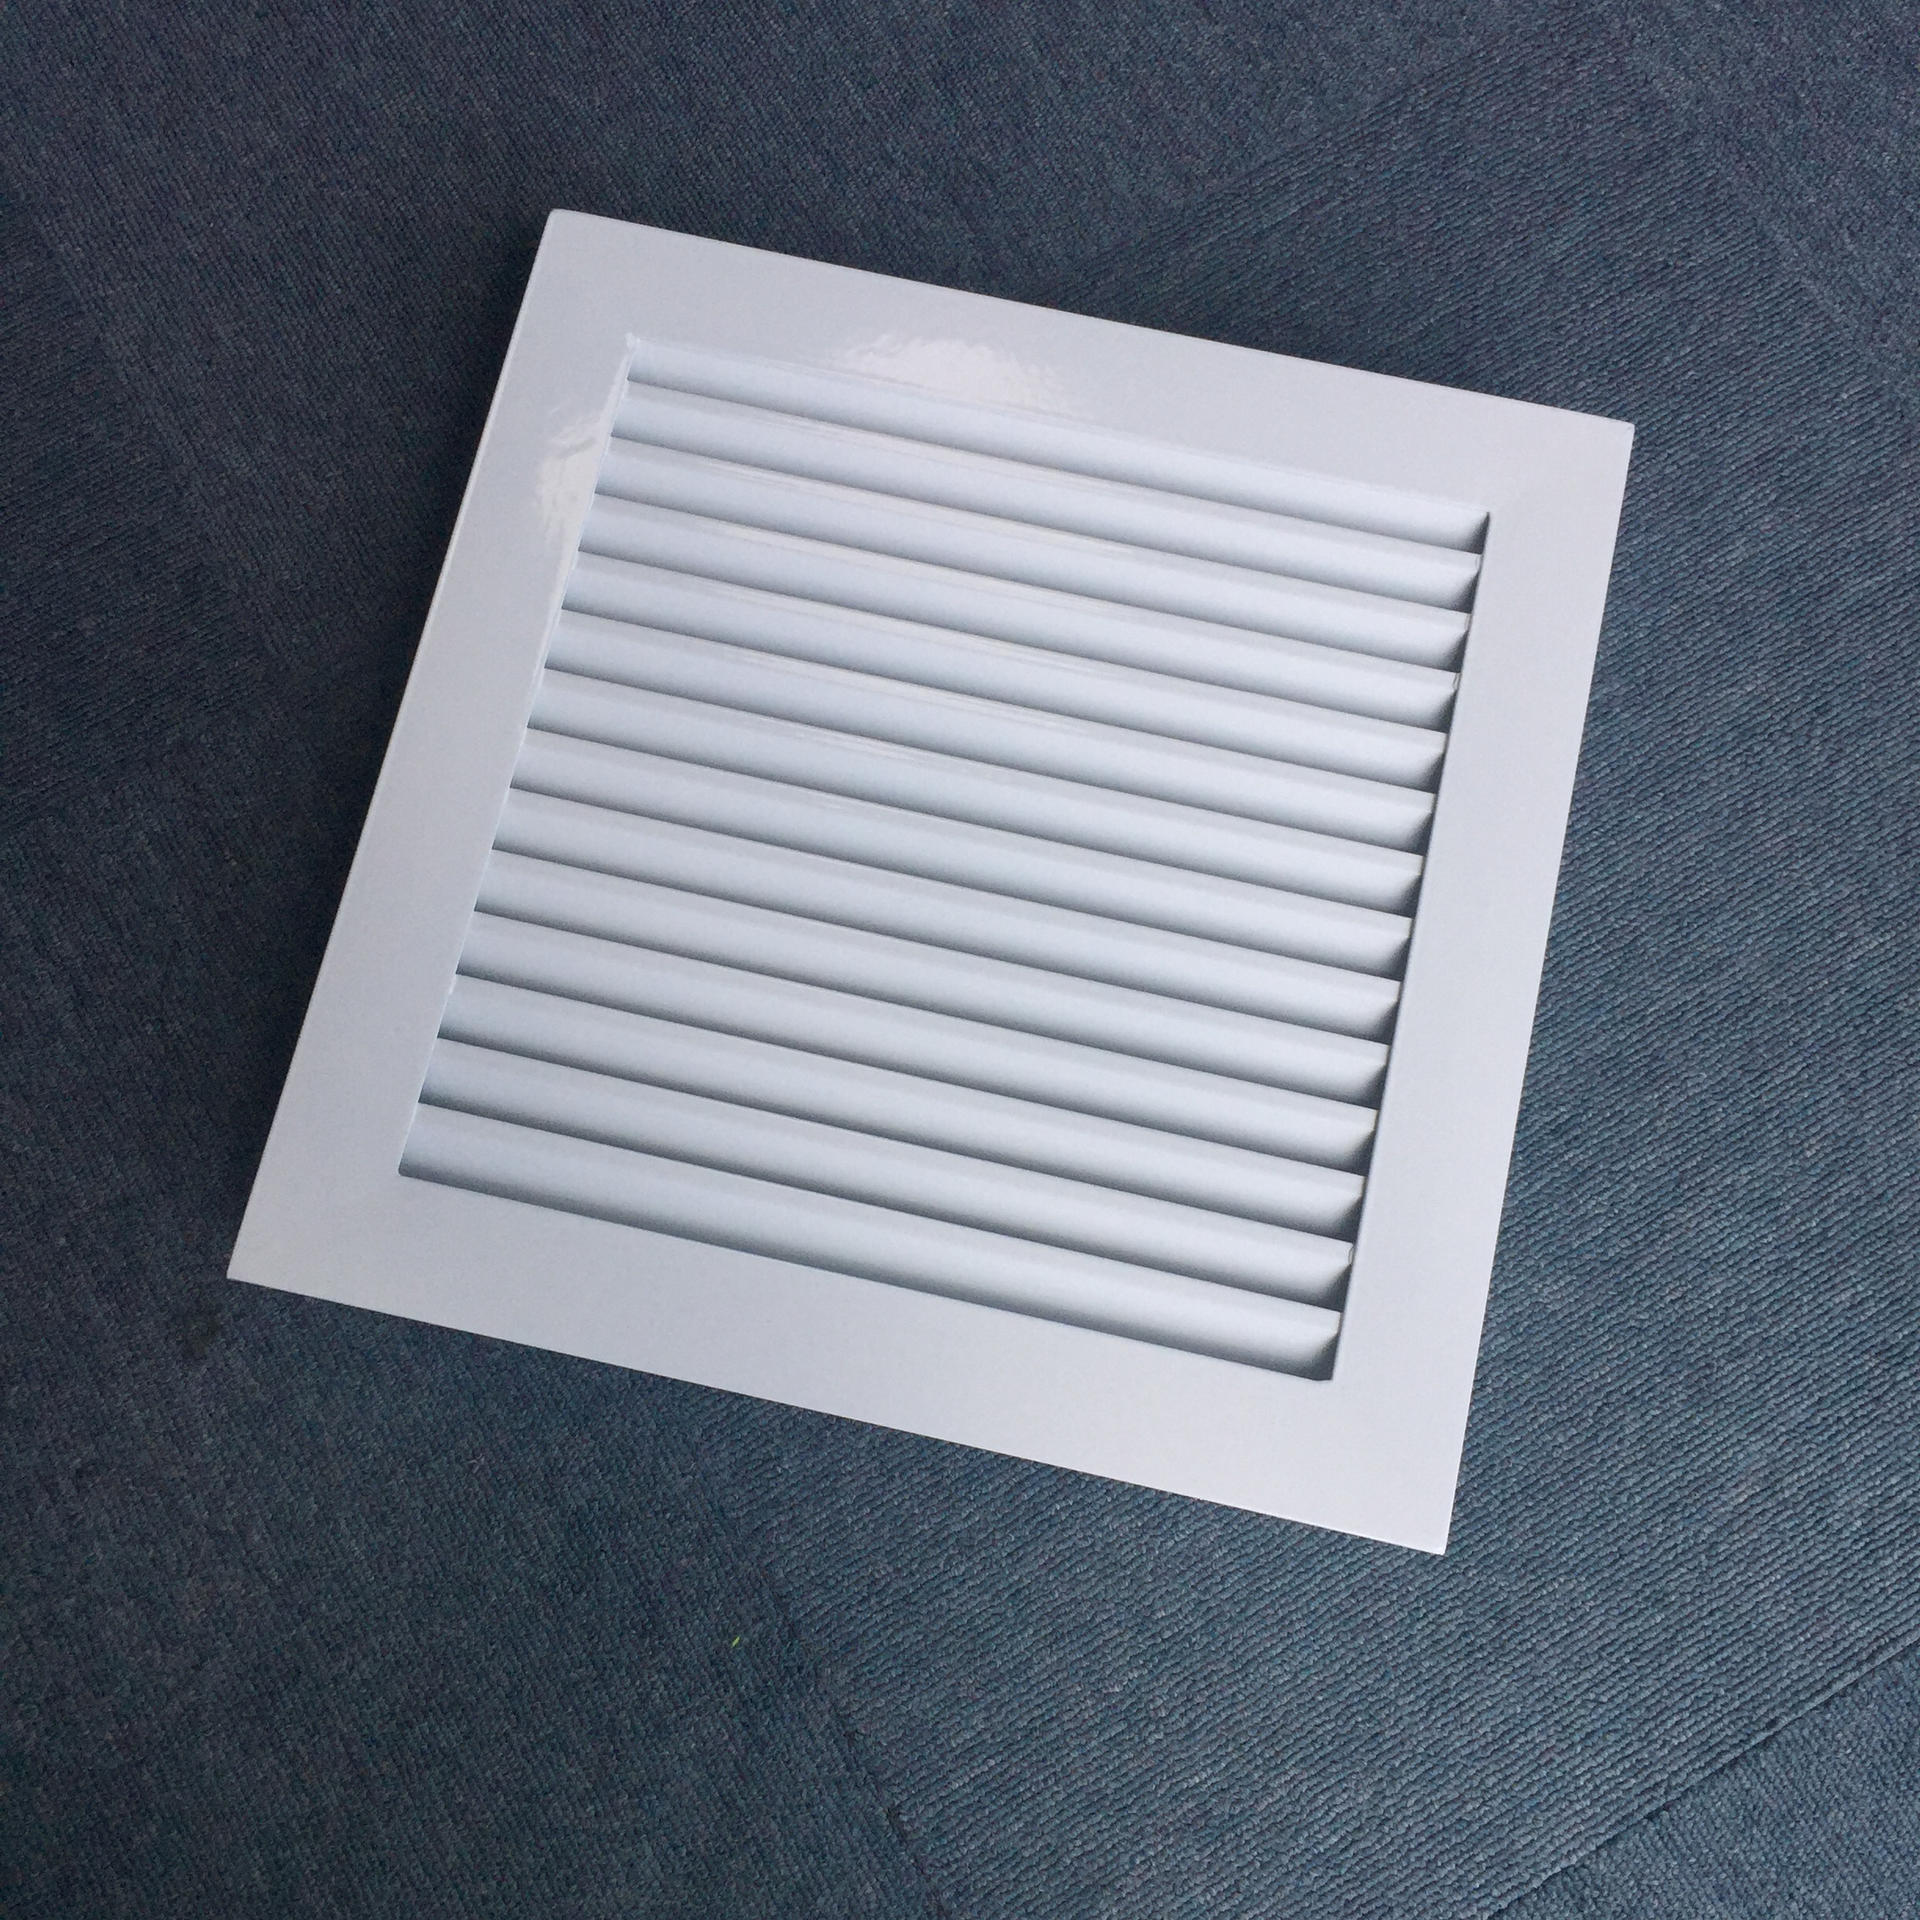 HVAC System Powder Coated Filter Mounted Air Vent Return Air Grille For Ventilation